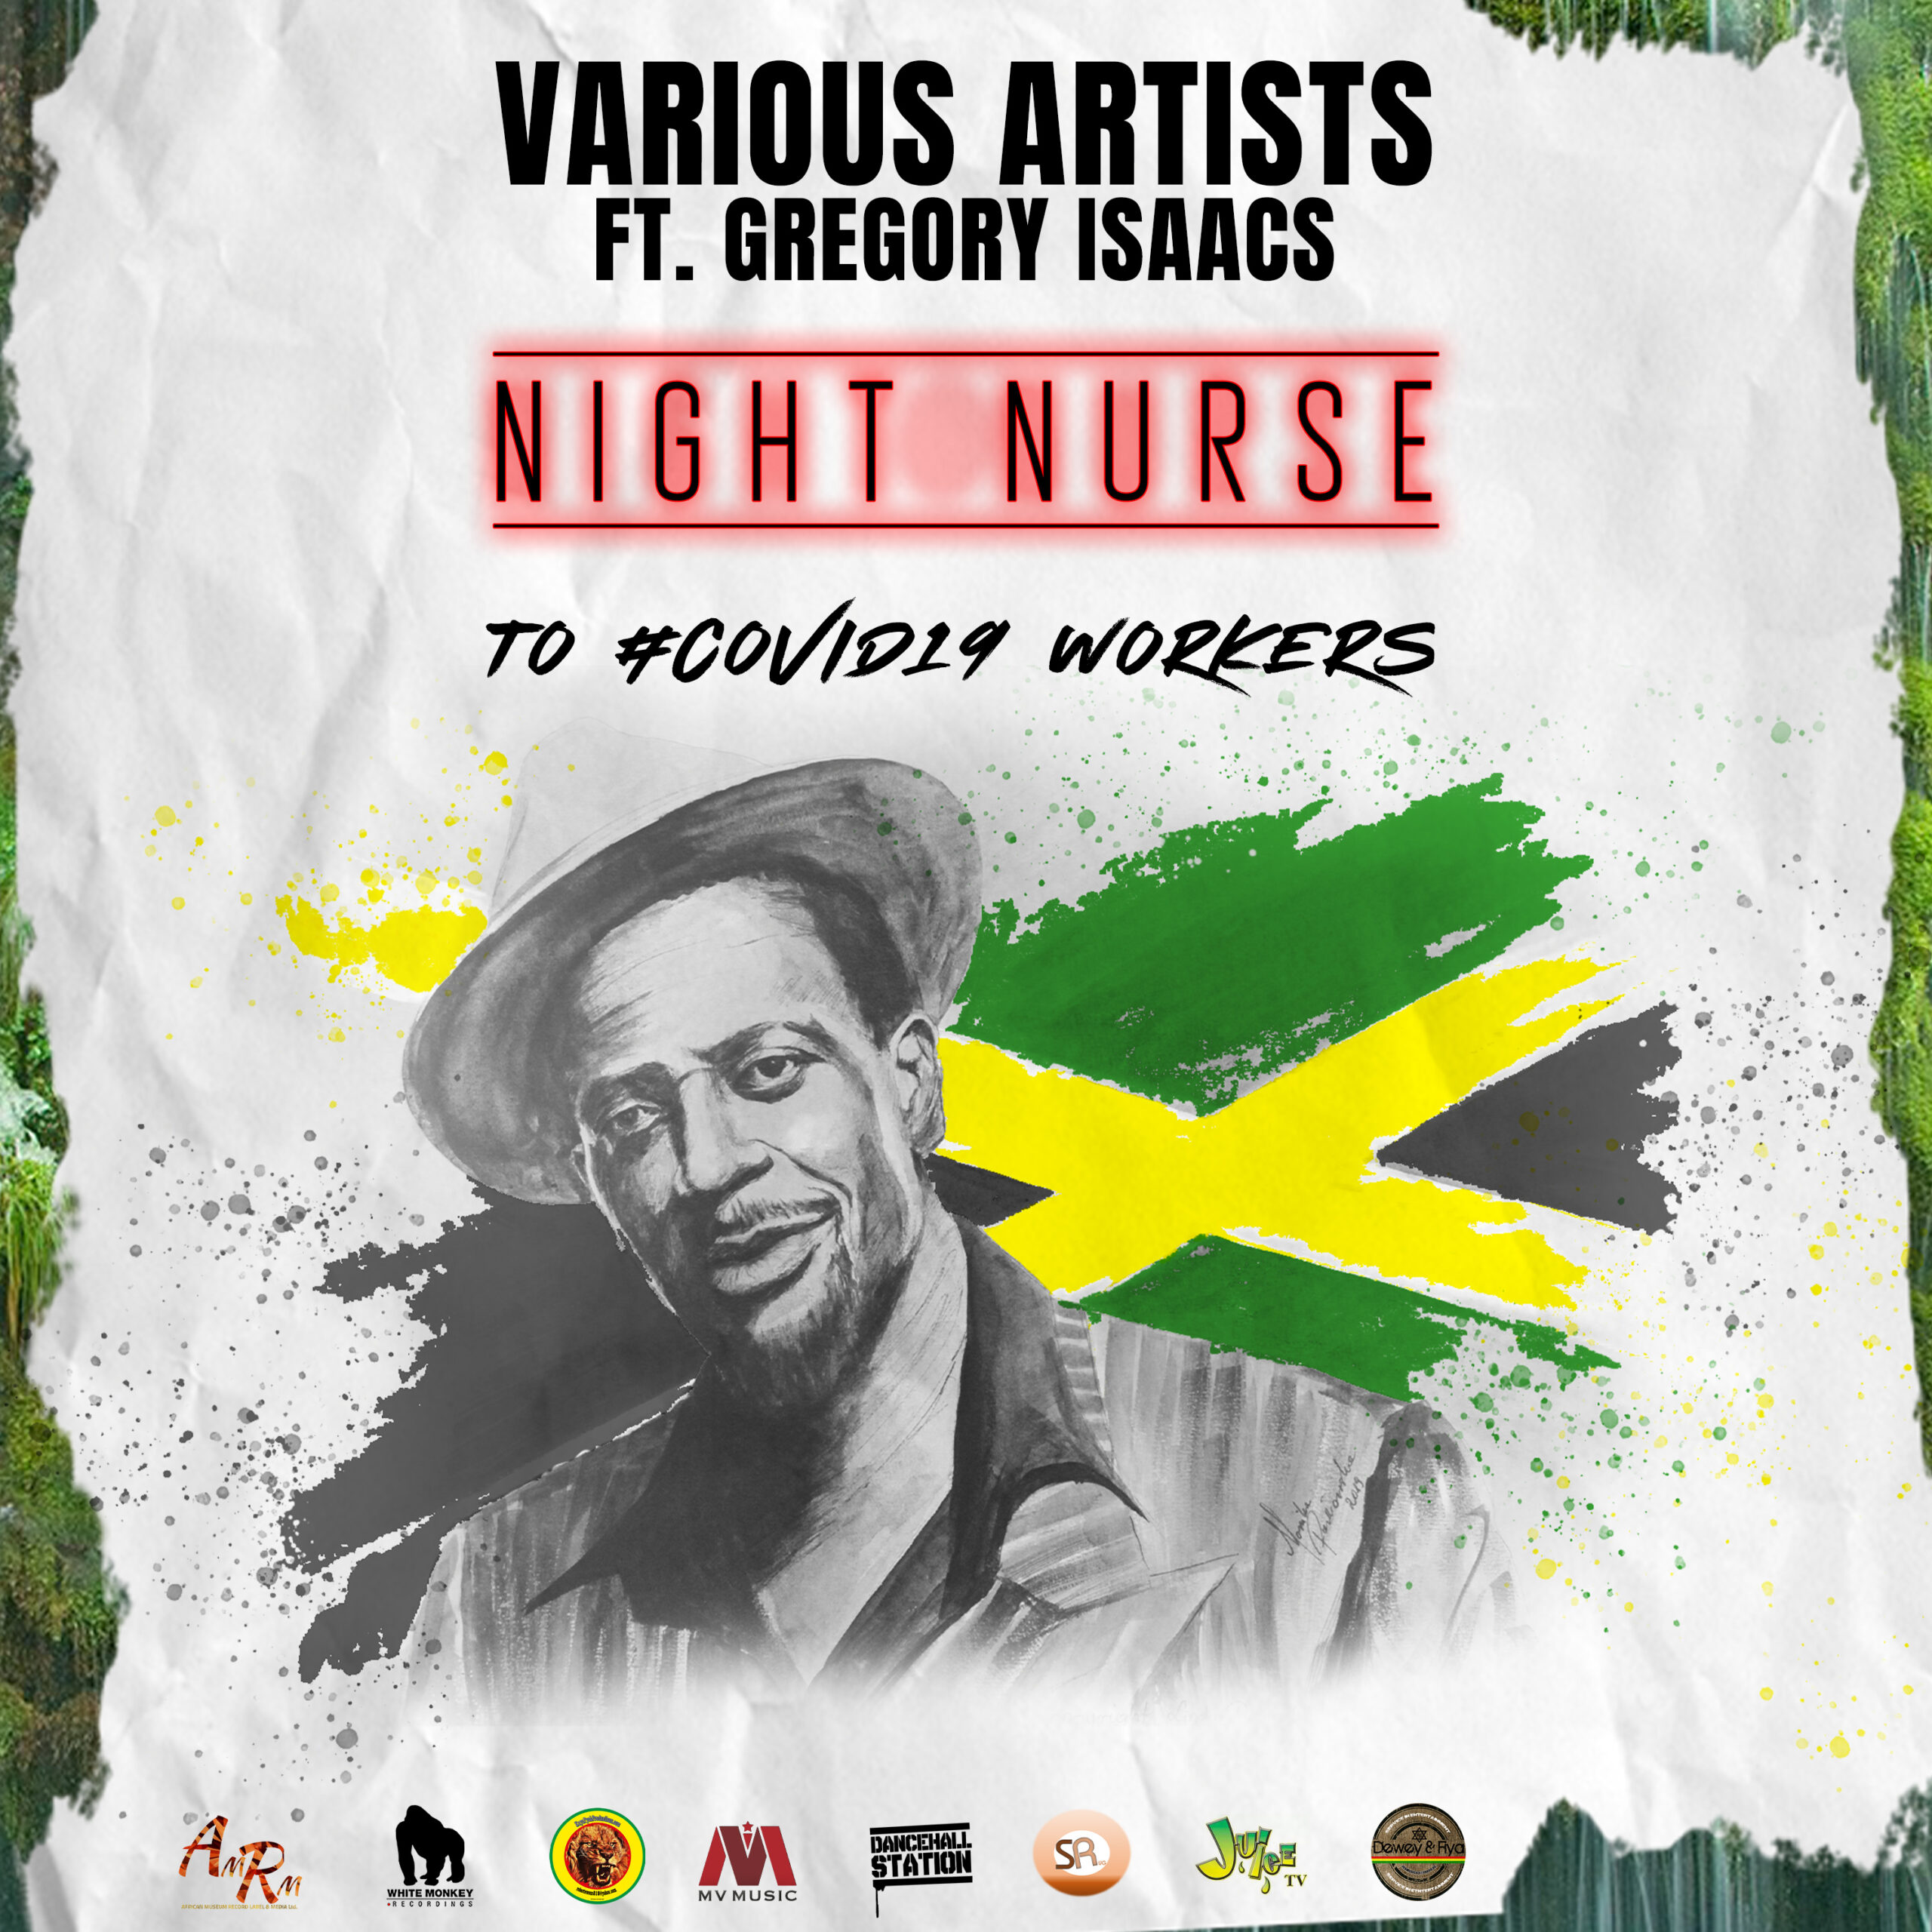 VARIOUS ARTISTS ft. GREGORY ISAACS – NIGHT NURSE TRIBUTE